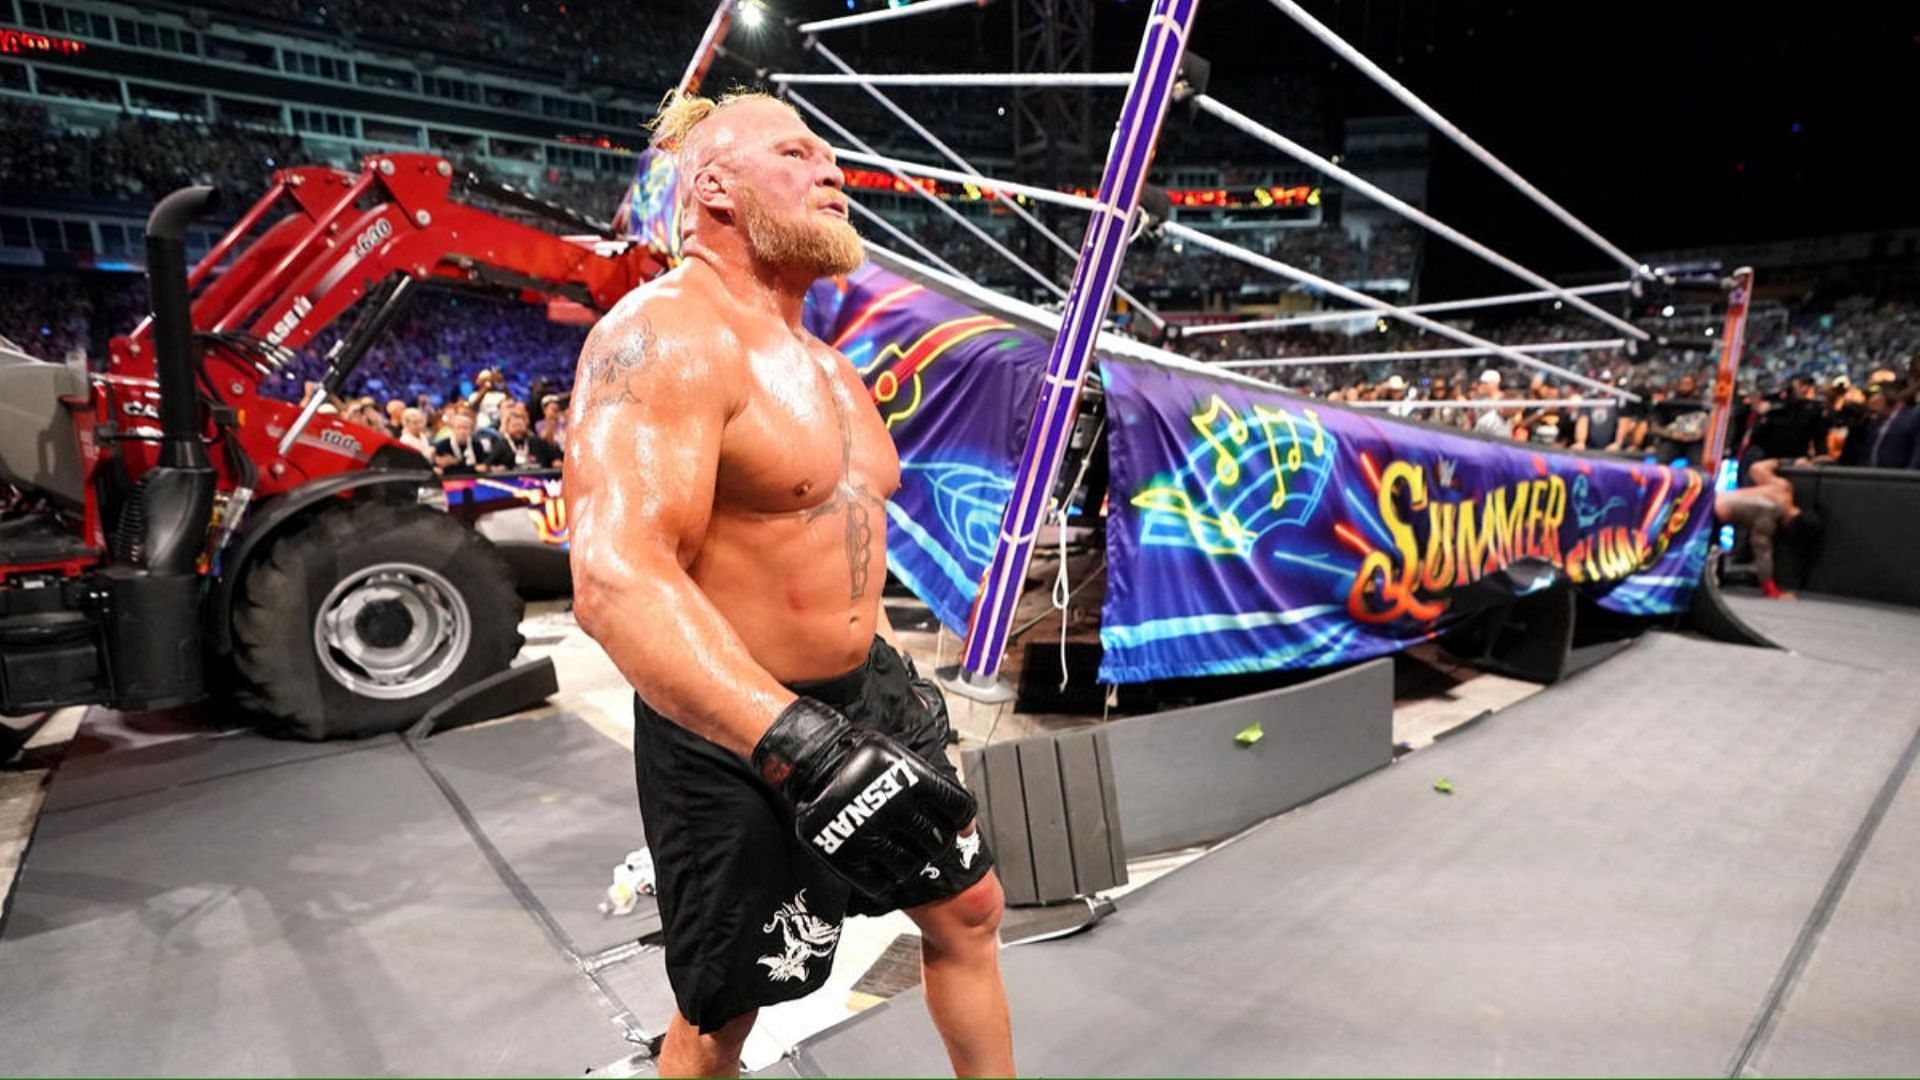 Brock Lesnar casually strolls around after destroying the ring at SummerSlam 2023.